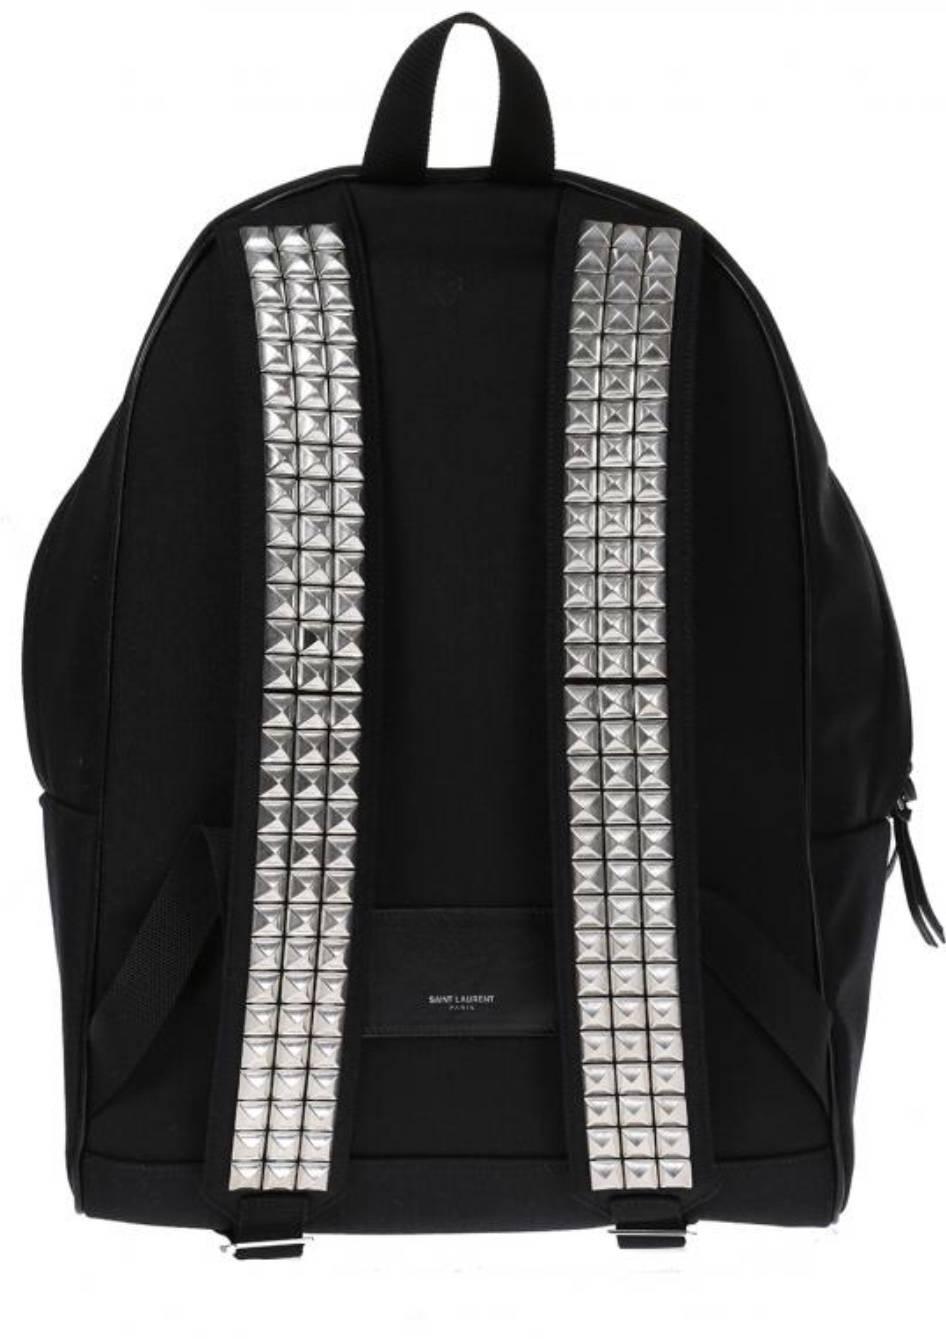 Black cotton backpack from Saint Laurent. Two-way zip fastening. Leather pocket on the front with a zebra motif print. Decorative silver-tone studs. Embossed logo on the front. Main inetrnal compartment with a zip pocket. Adjustable shoulder straps